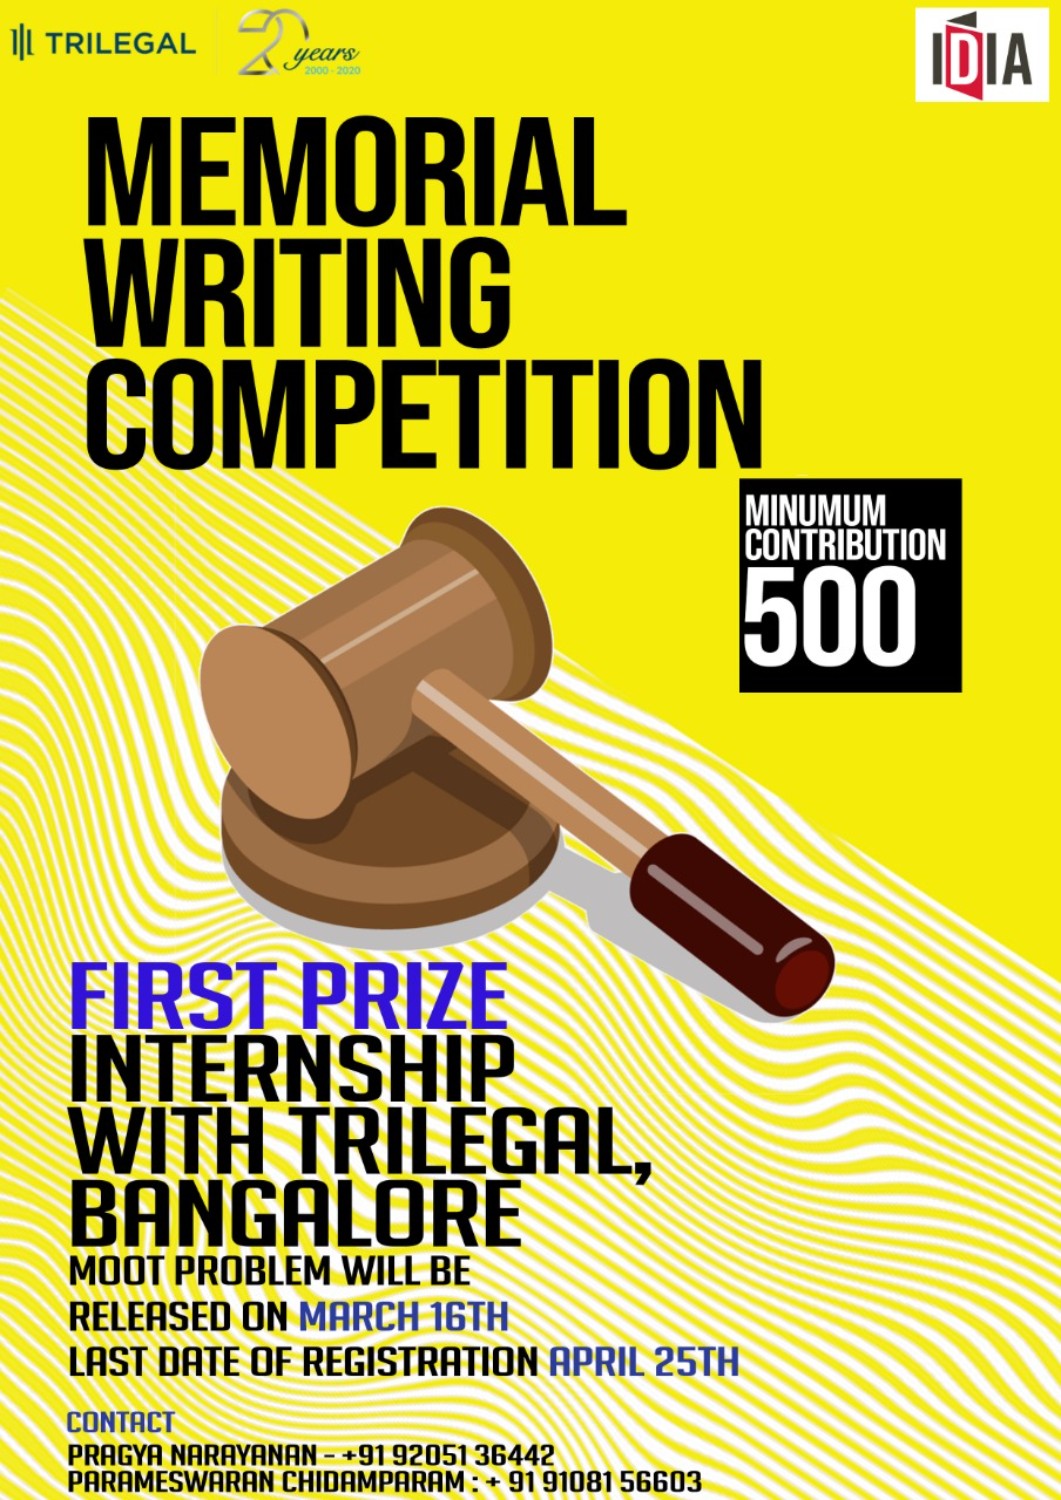 1st National Memorial Writing Competition, IDIA Kerala Chapter